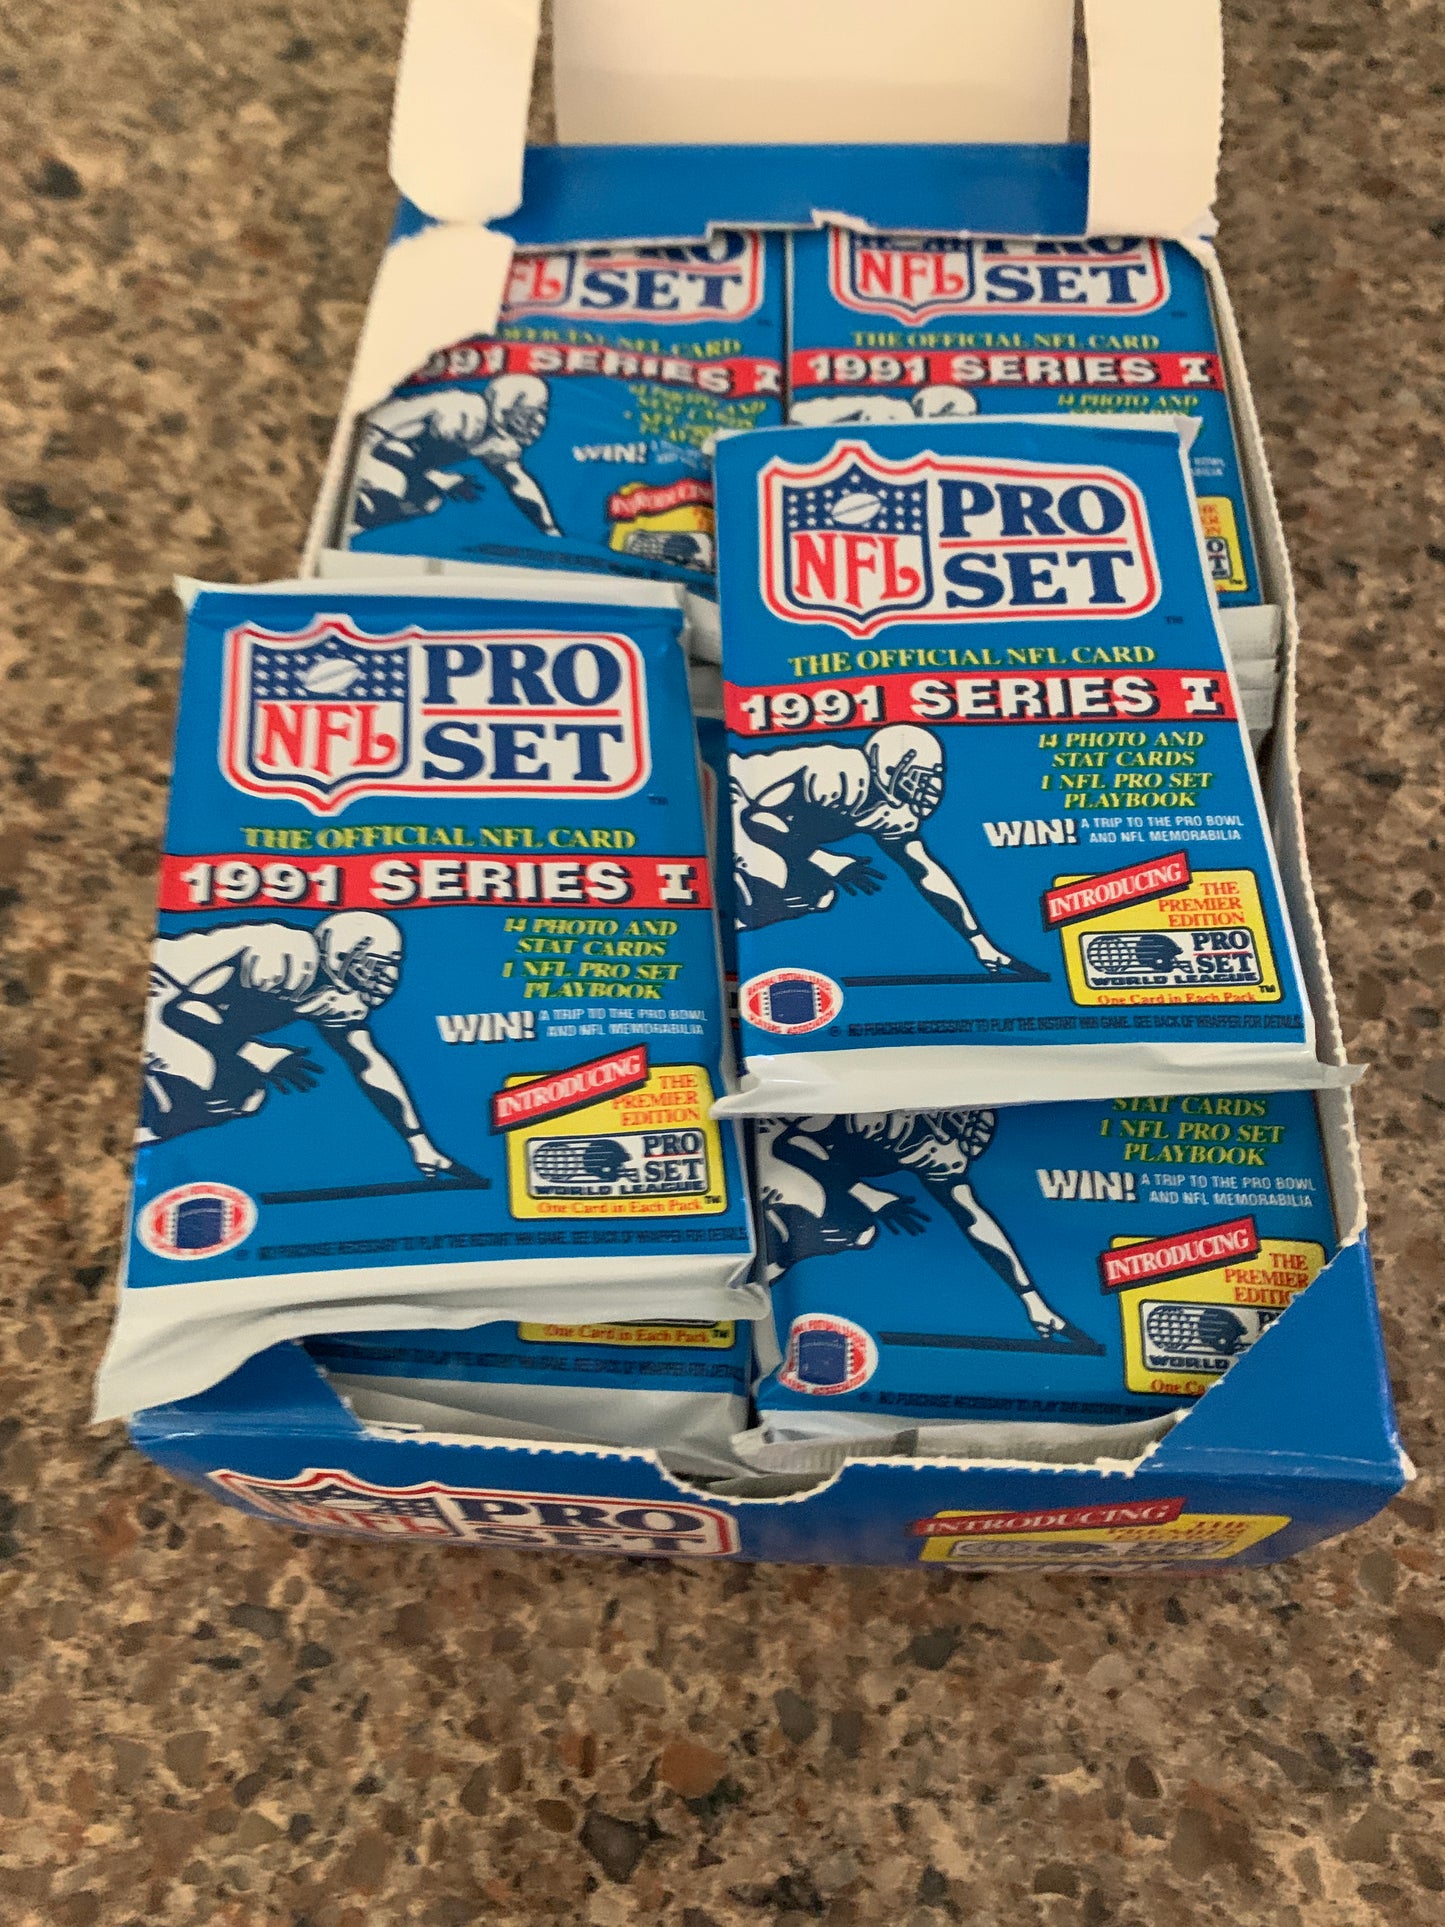 1991 Pro Set Series 1 Football Lot of 4 packs for sale.